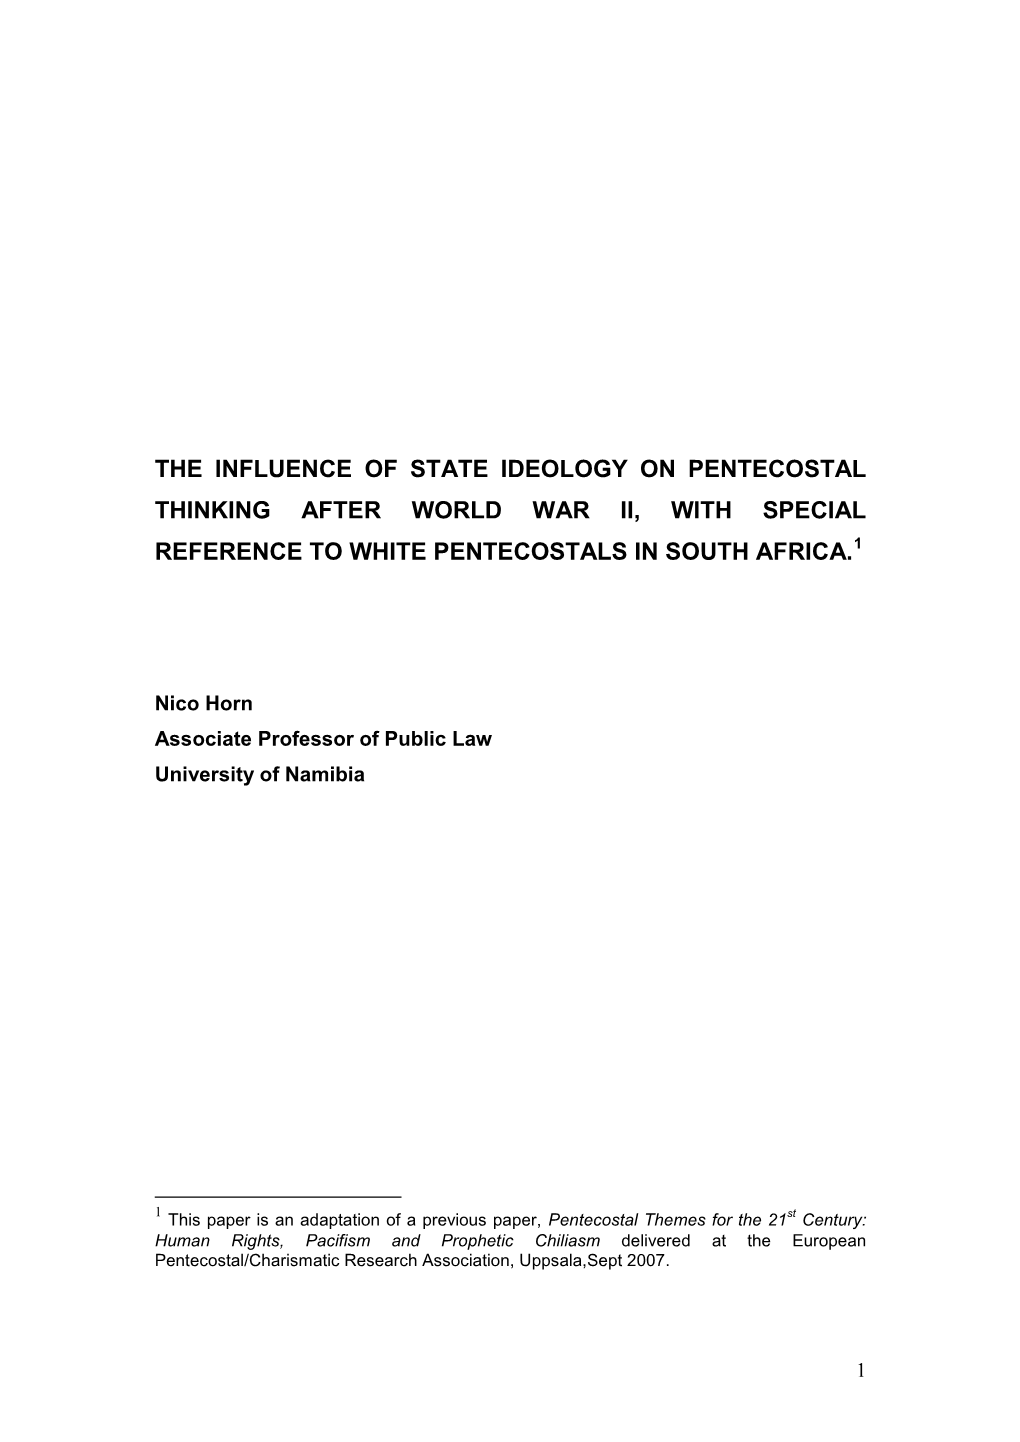 The Influence of State Ideology on Pentecostal Thinking After World War Ii, with Special Reference to White Pentecostals in South Africa.1